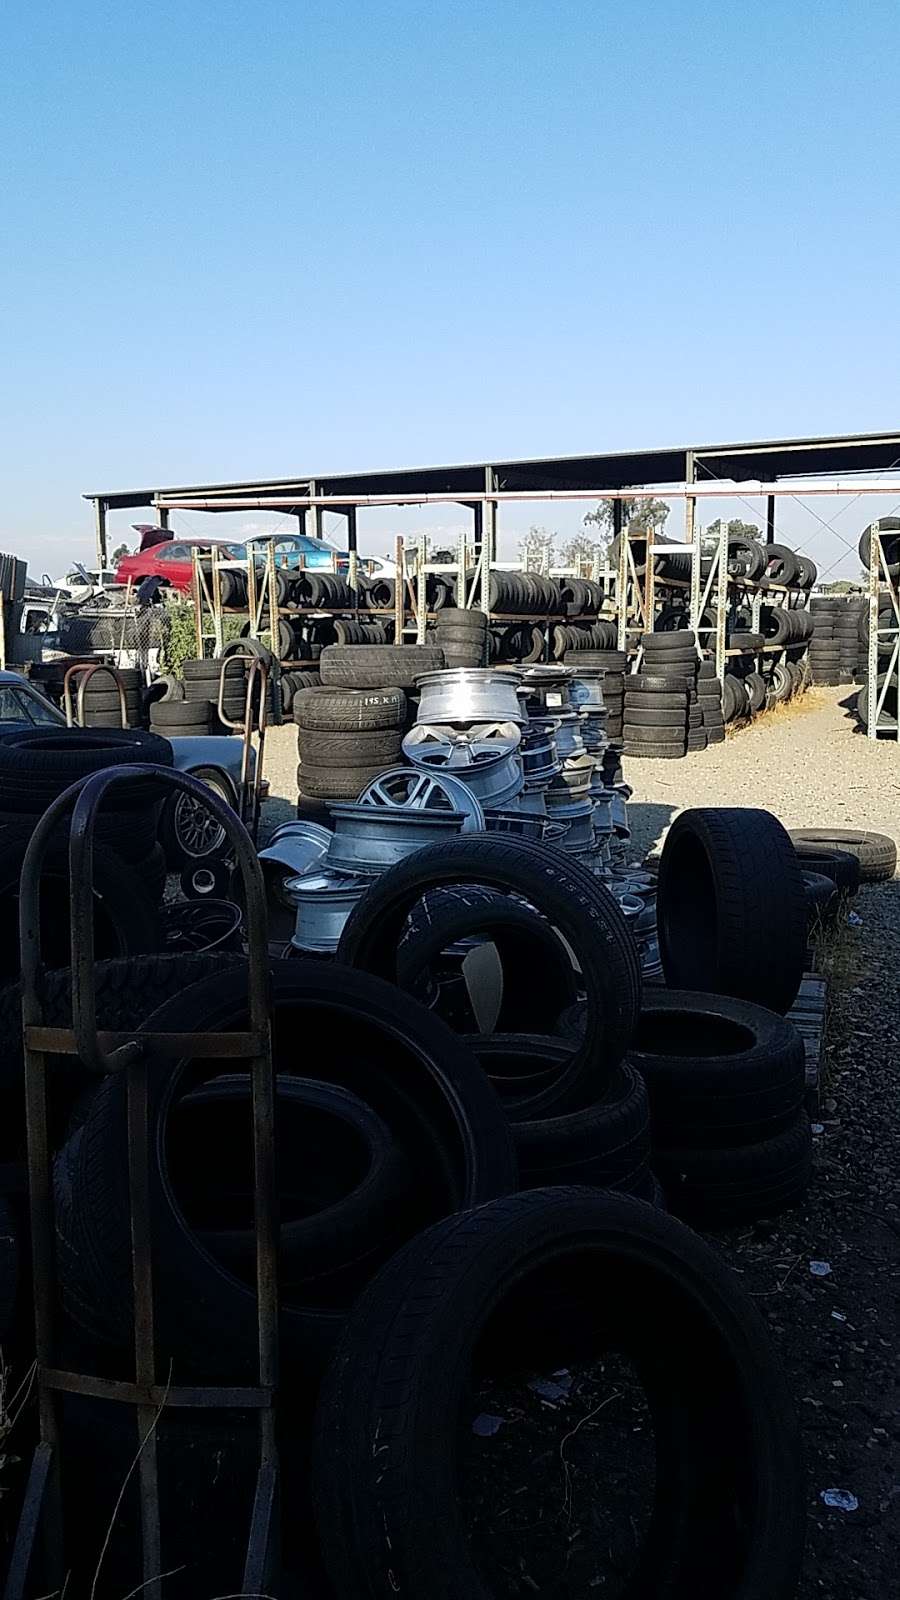 Used Tire King | 2025 S Milliken Ave # D, Ontario, CA 91761, USA | Phone: (909) 605-0733